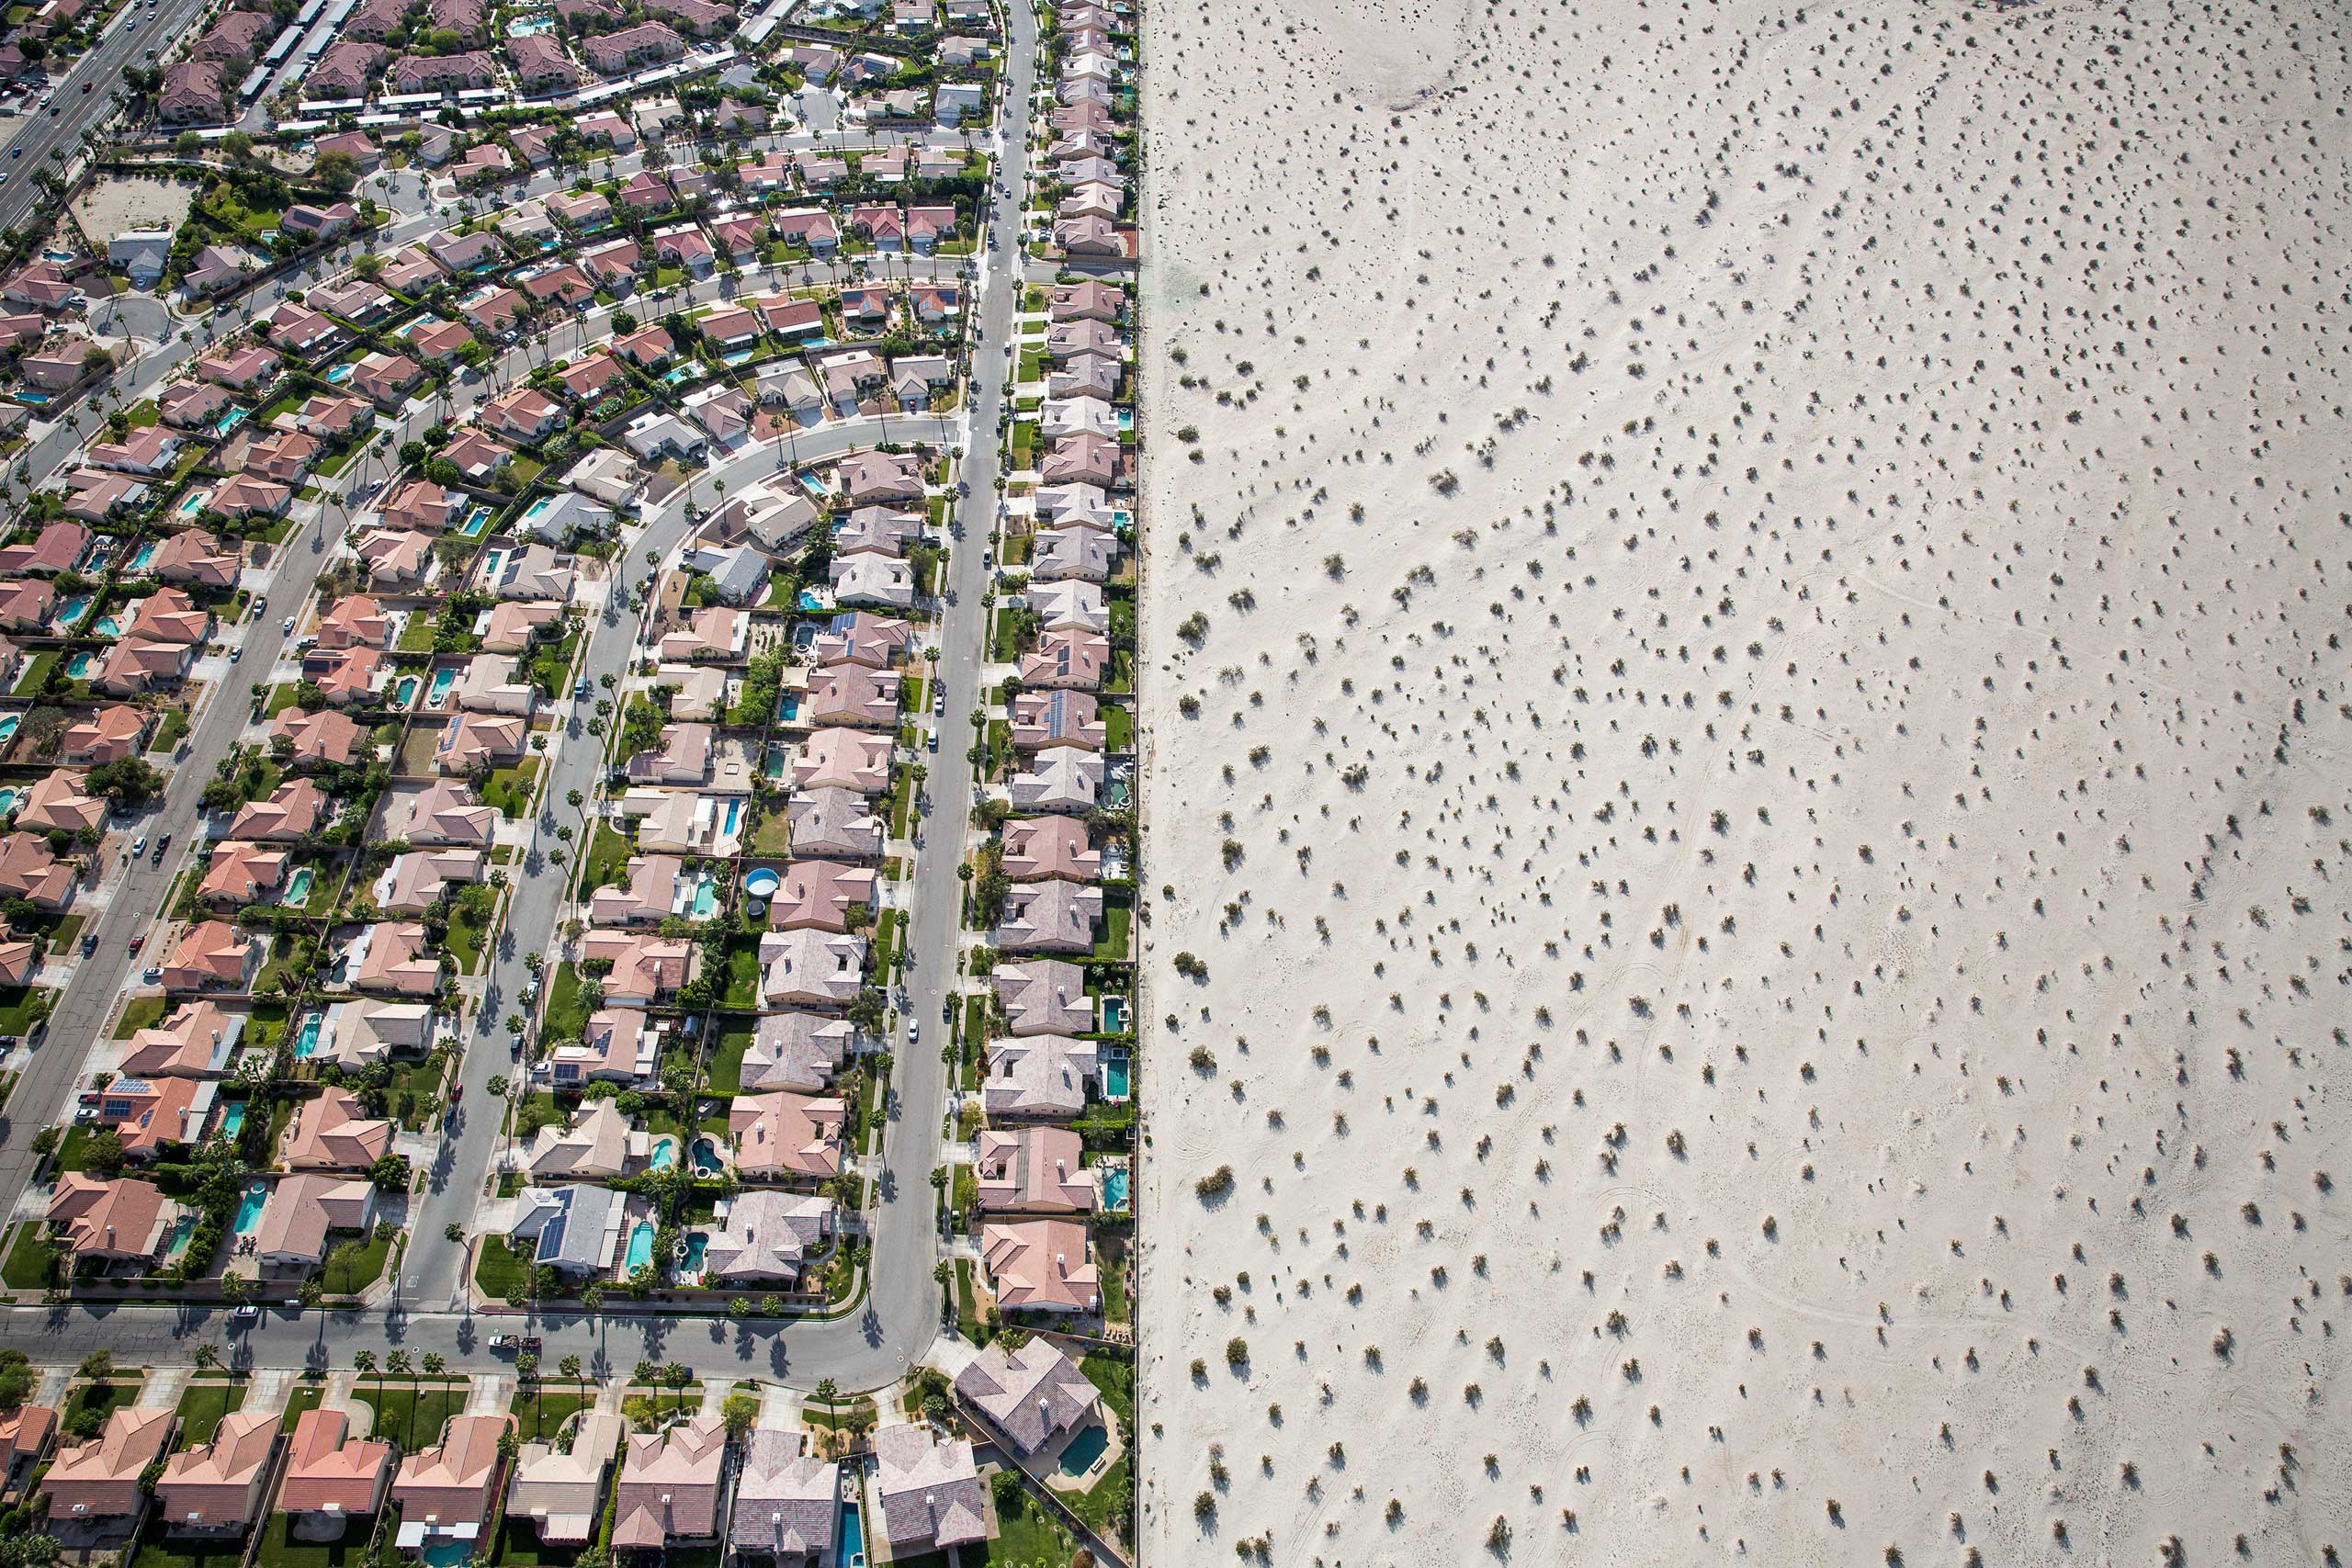 The New York Times: California DroughtA housing development on the edge of undeveloped desert in Cathedral City, Calif., April 3, 2015.